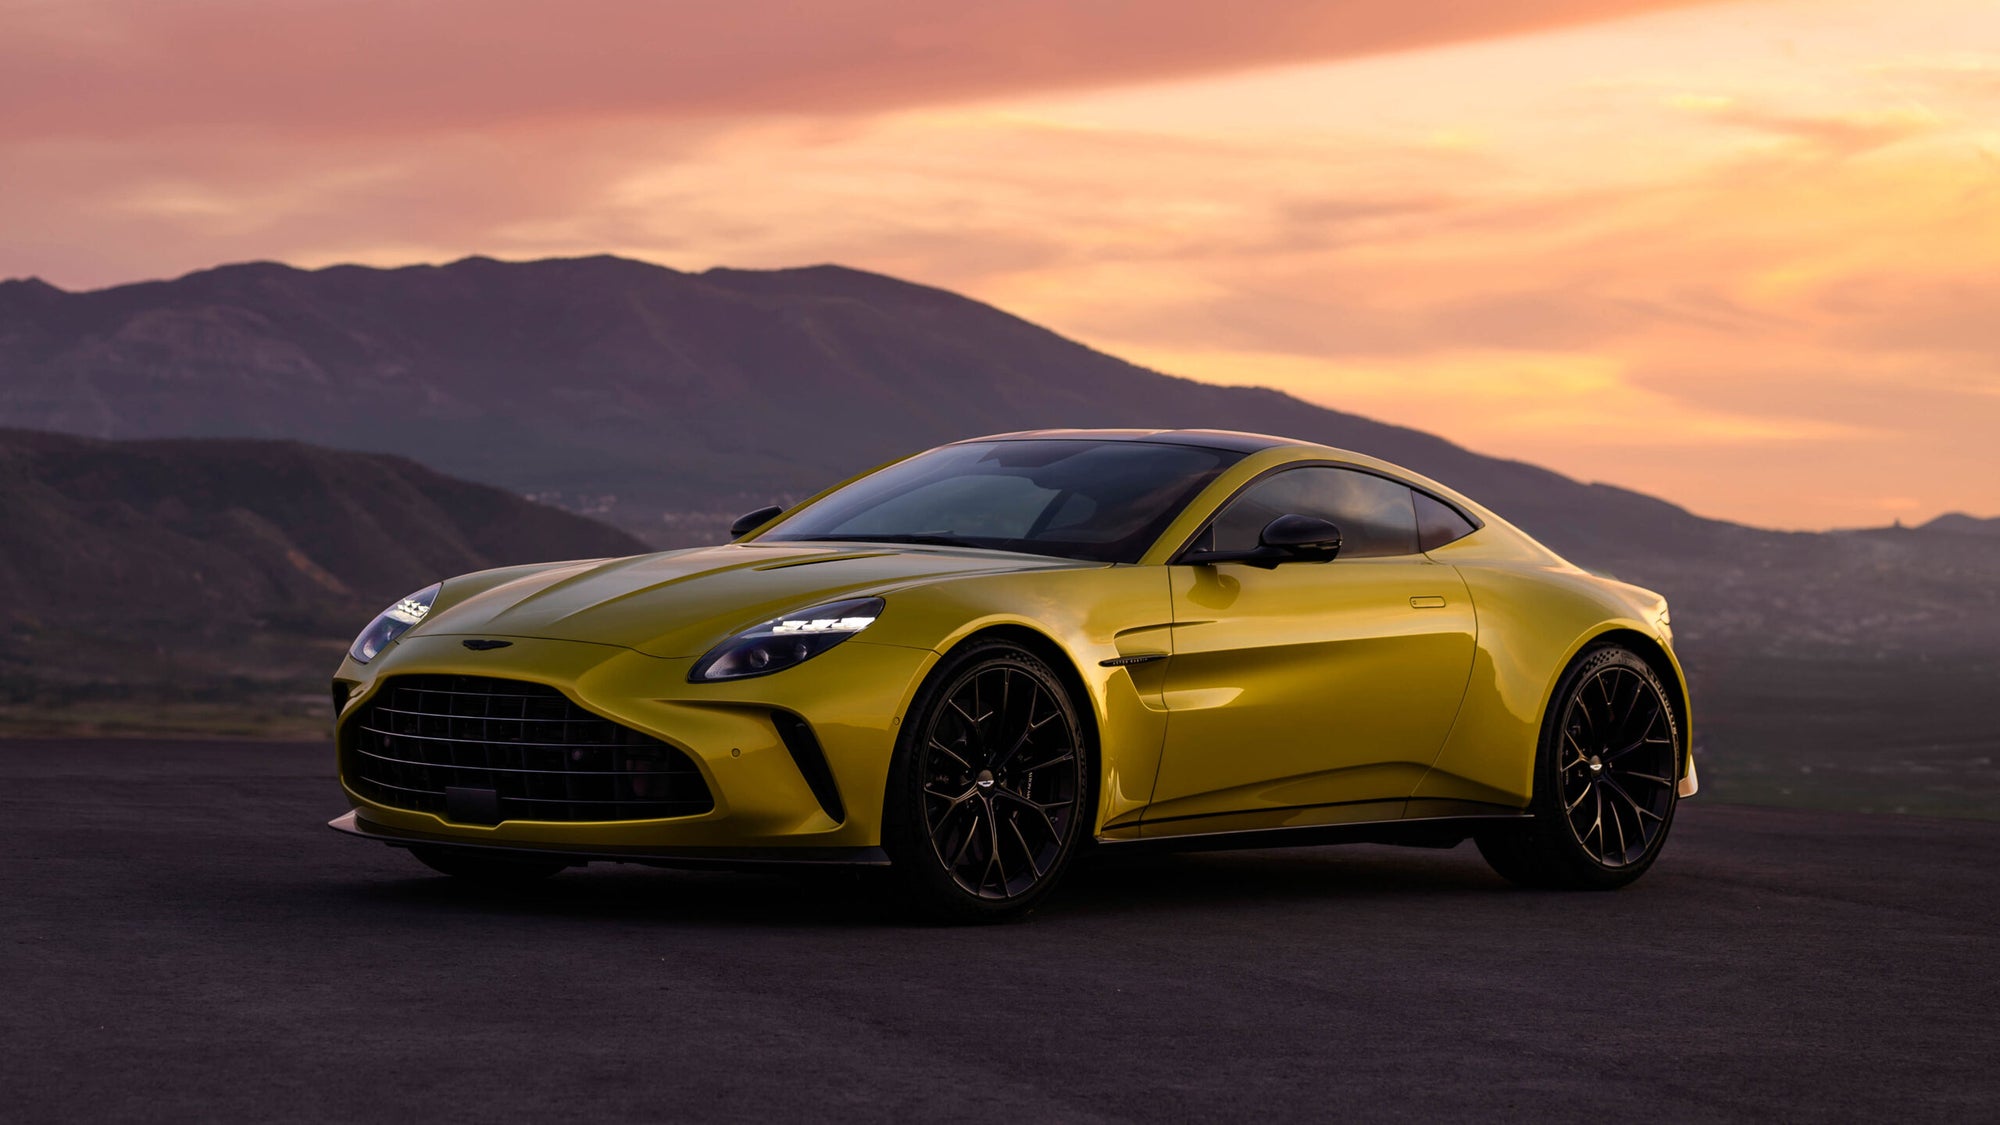 The latest Aston Martin Vantage receives an impressive 665 horsepower and features the sleek design of the DB12.